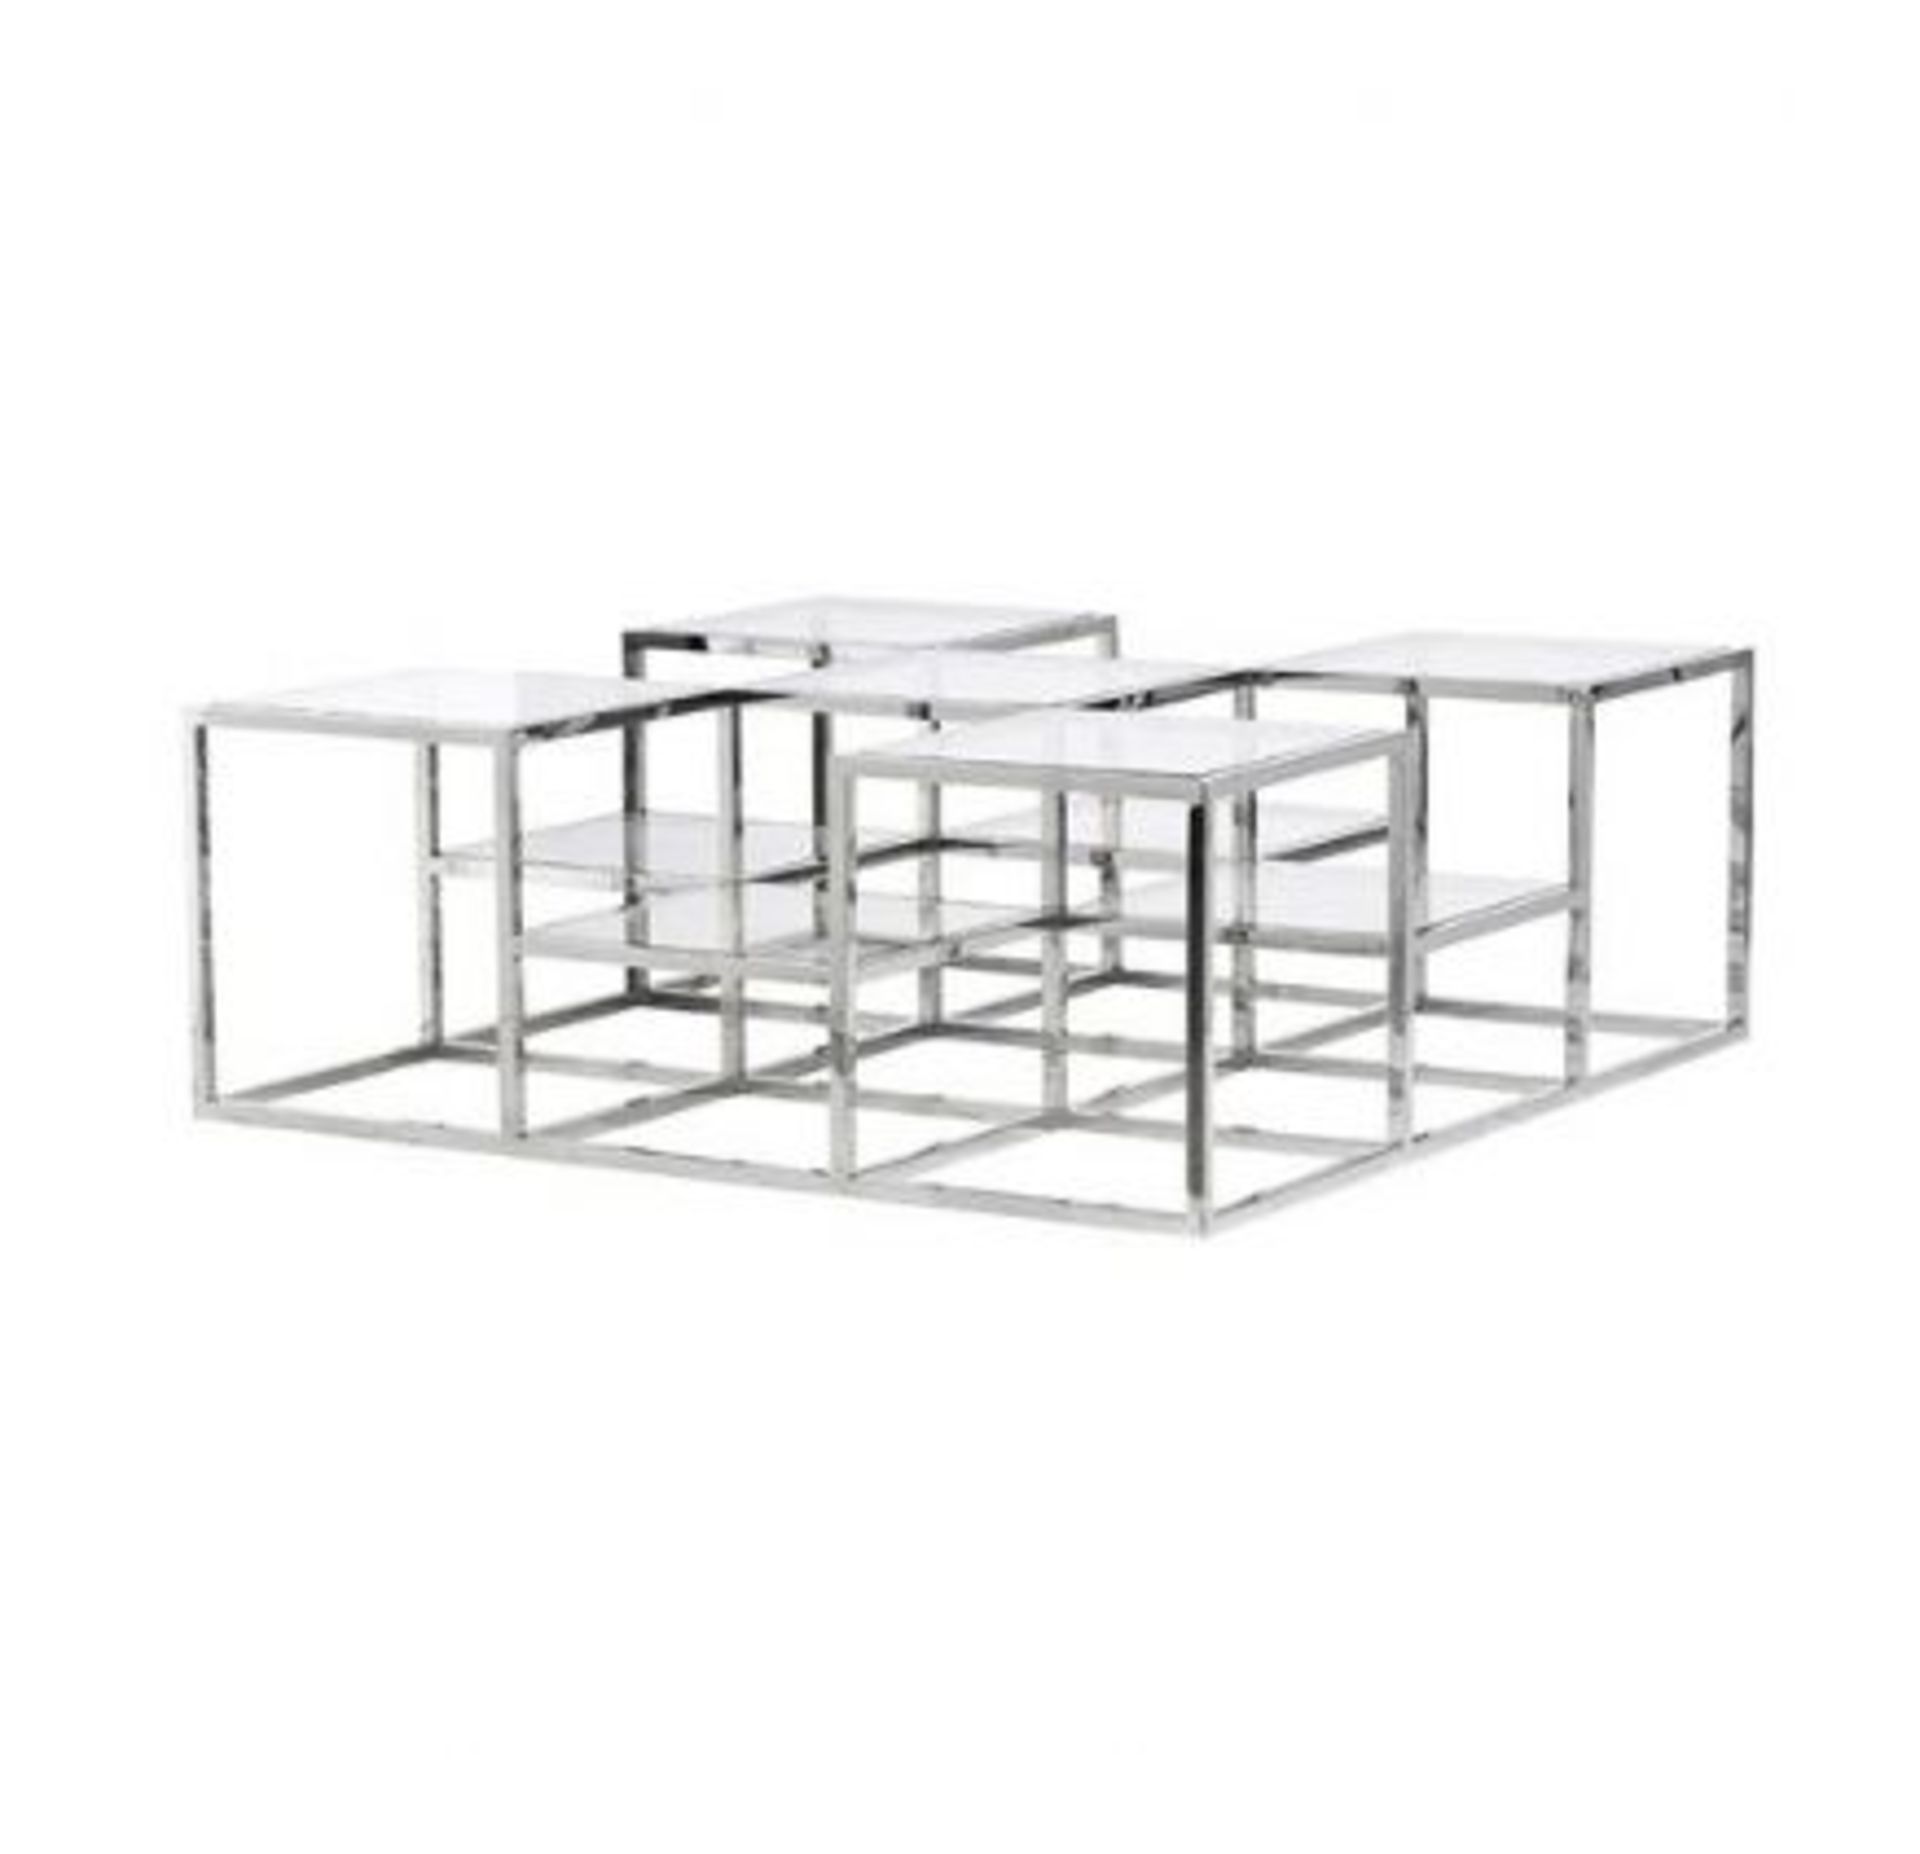 1 x METAL AND GLASS MULTI COFFEE TABLE - CL364 - Ref:WH- J2288 - Location: Altrincham WA1